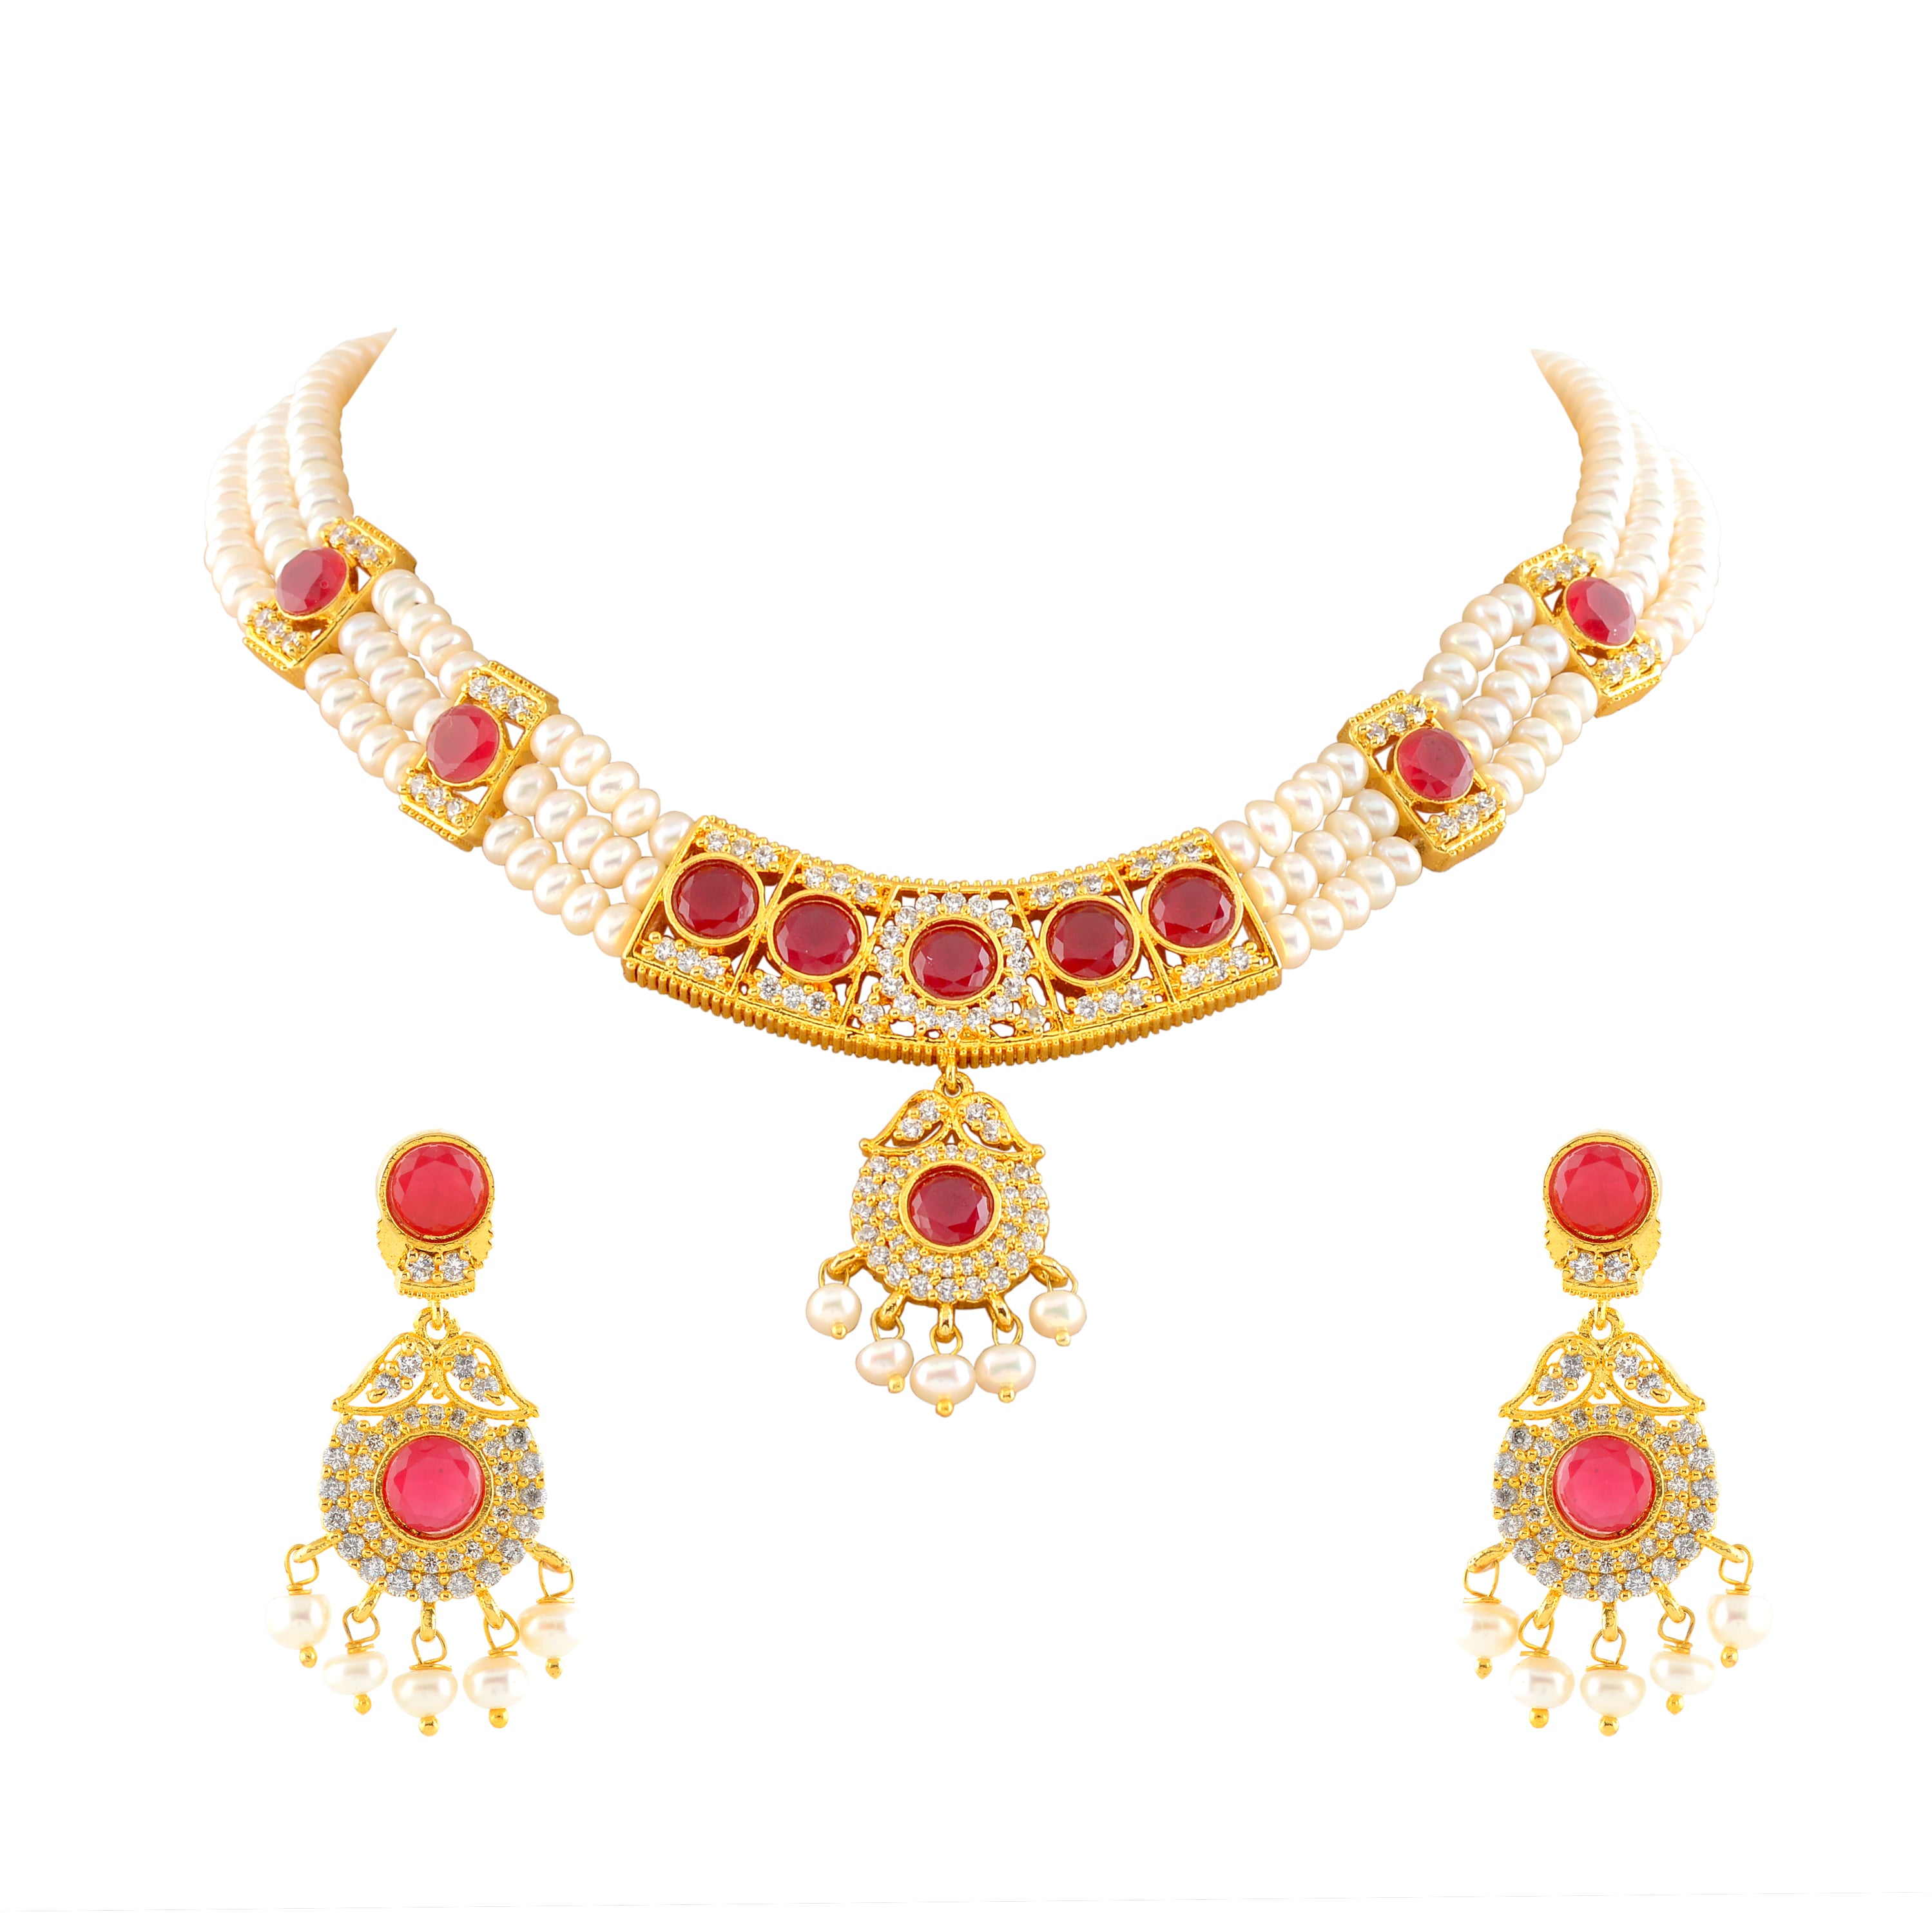 Elegant 3-Layered Necklace Set Adorned with Red Stones - Krishna Jewellers Pearls and Gems